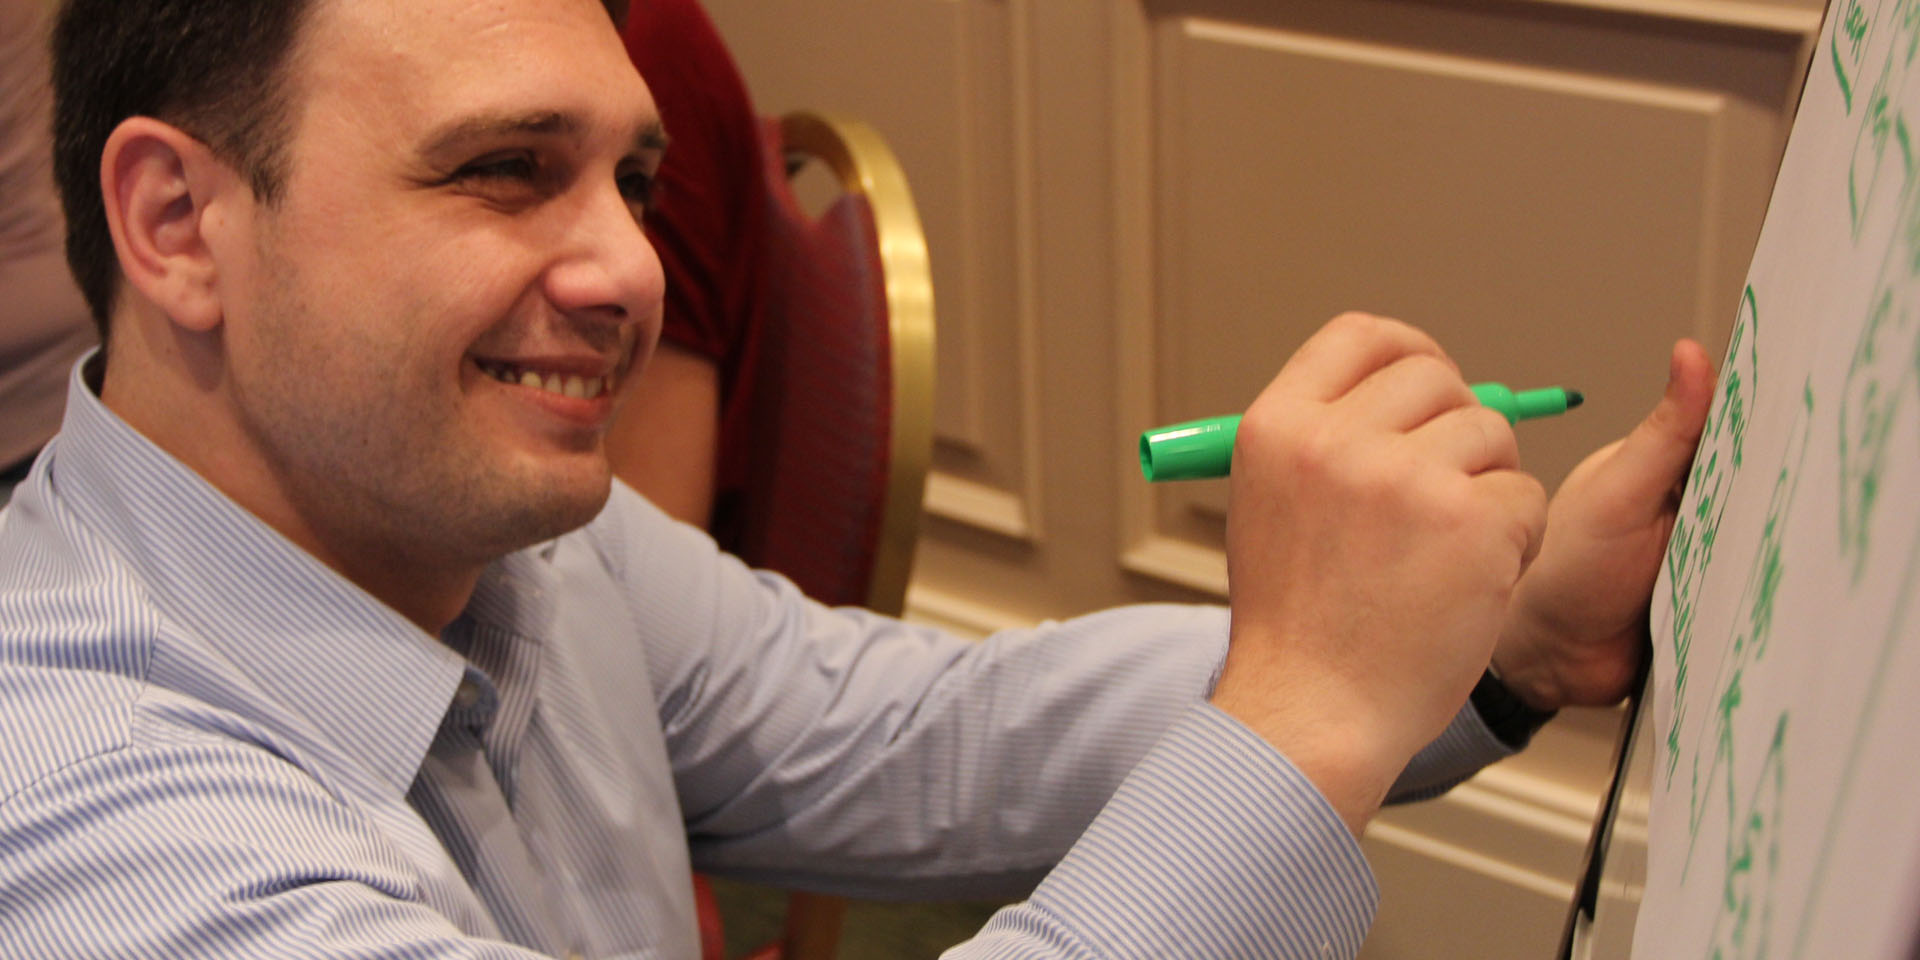 A smiling man writing on a whiteboard with a green marker.